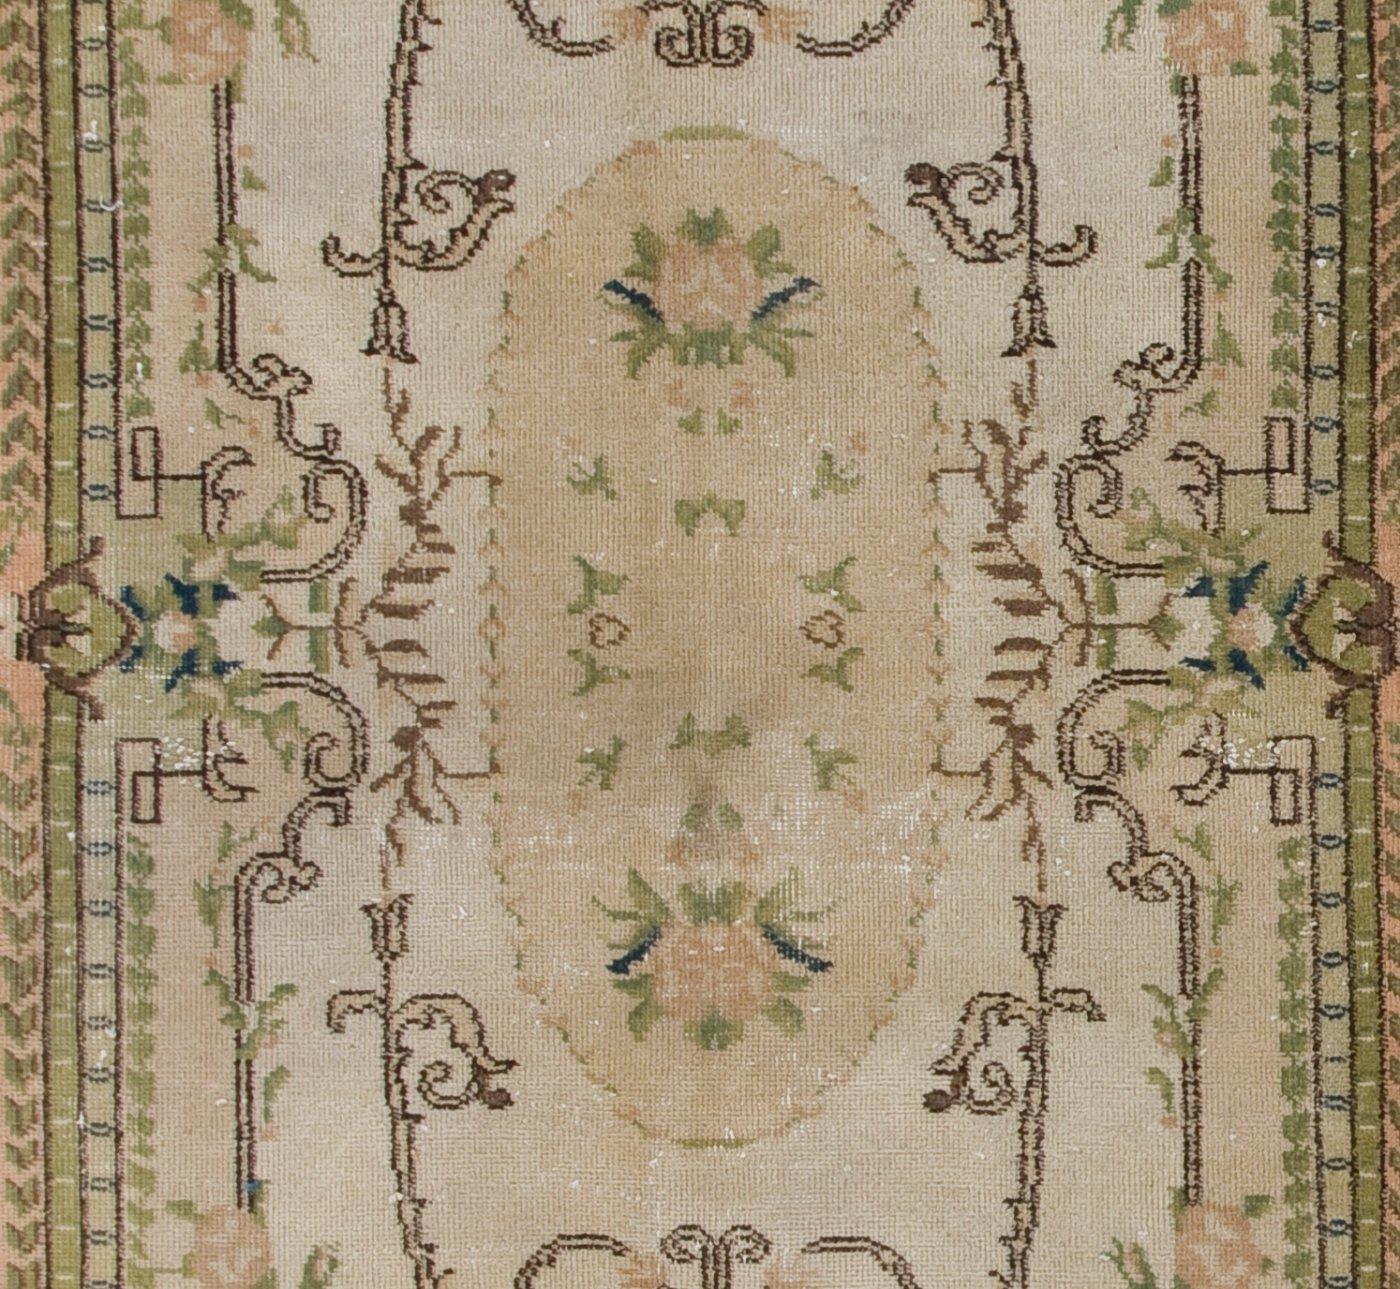 4x6.8 Ft Vintage Aubusson Inspired Turkish Handmade Wool Rug in Soft Colors In Good Condition For Sale In Philadelphia, PA